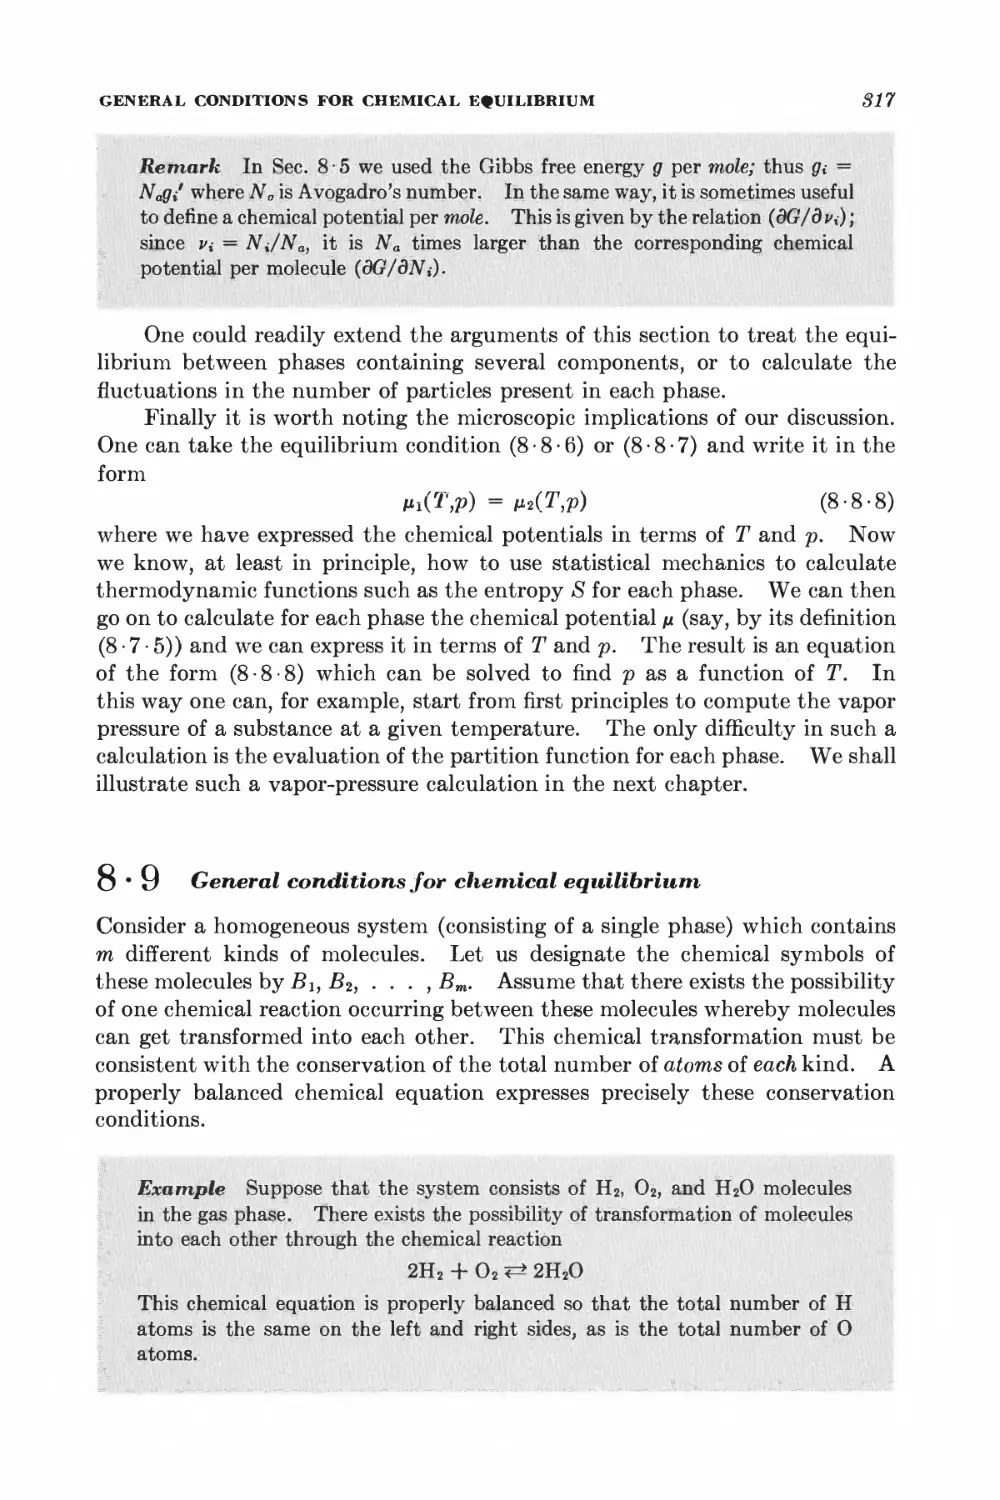 8.9 General conditions for chemical equilibrium